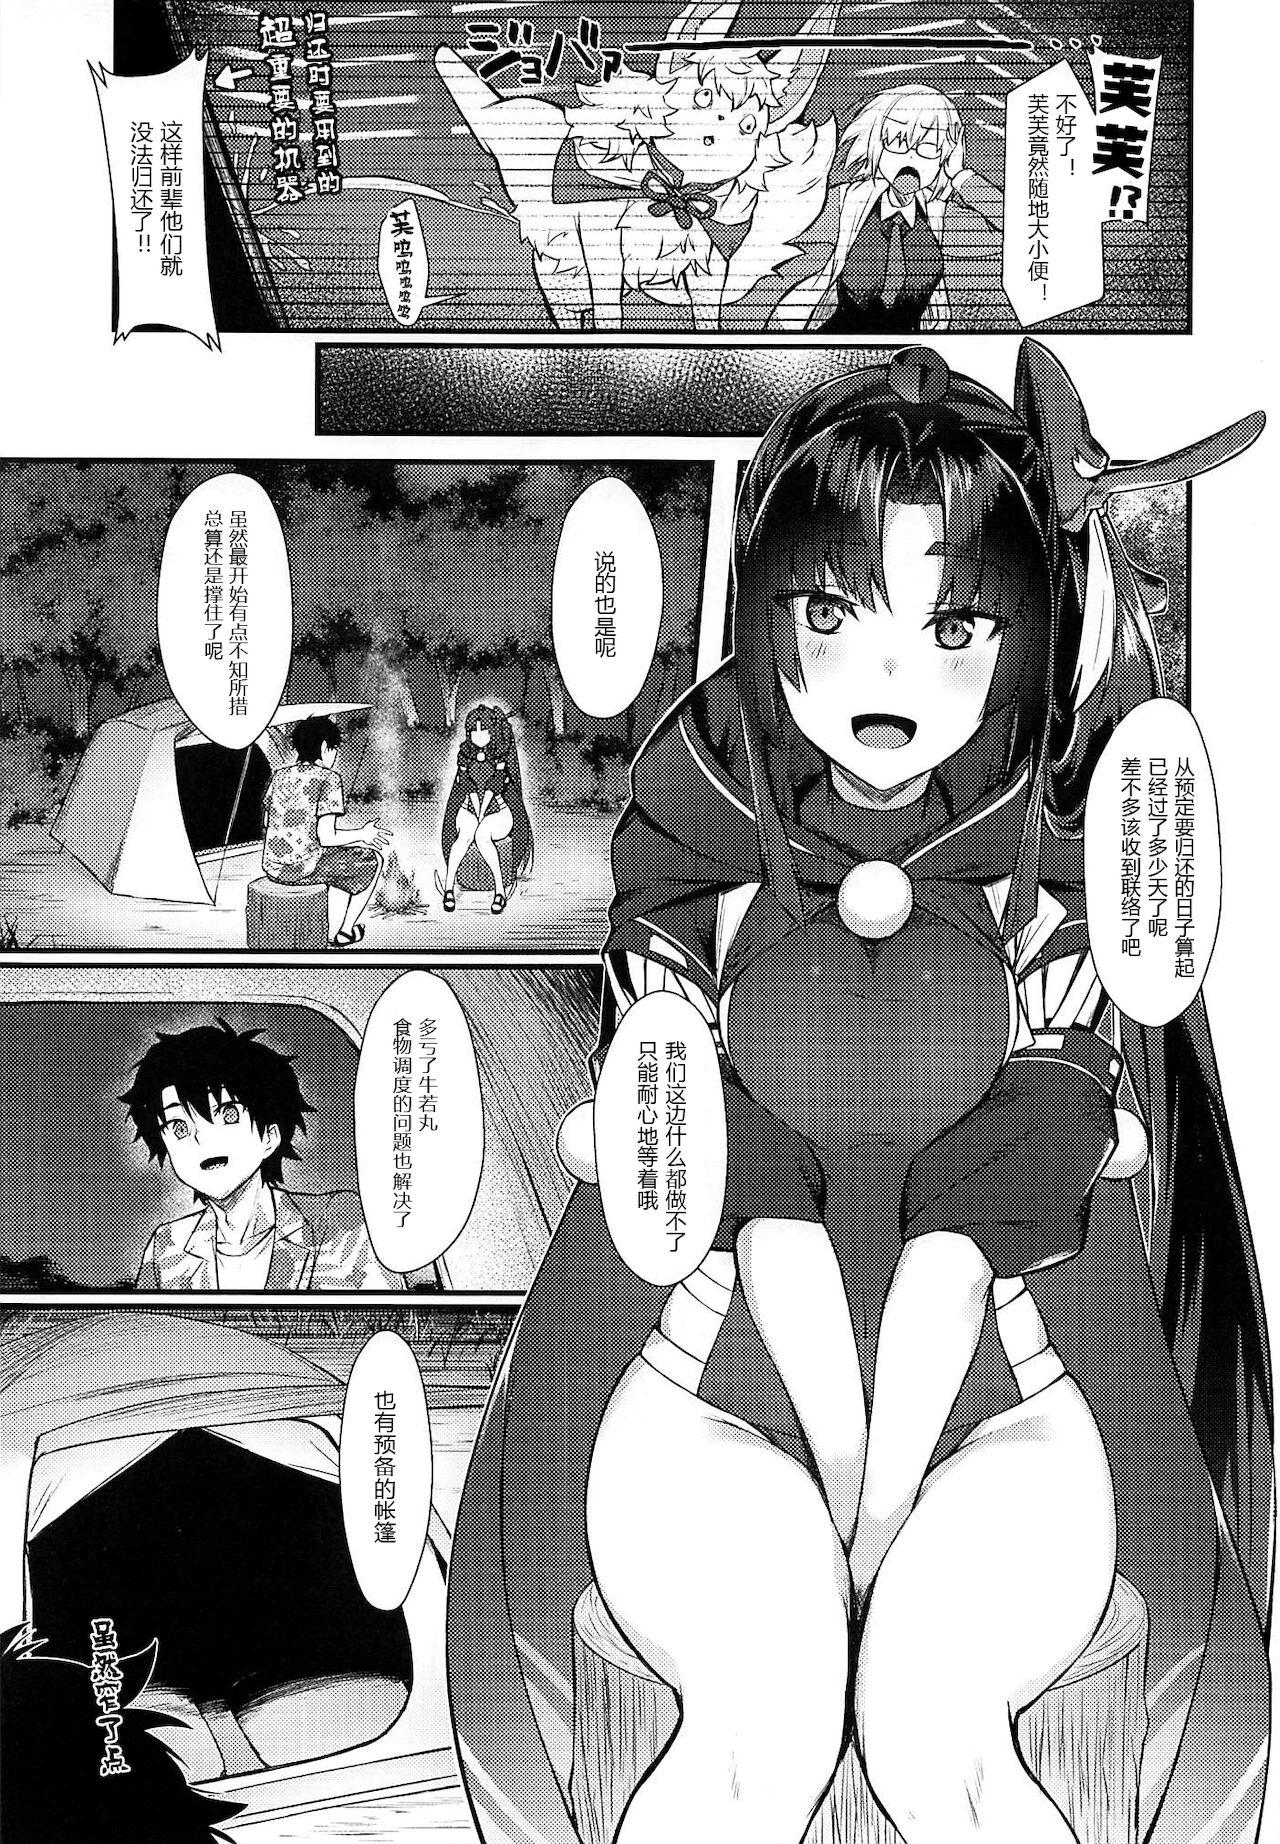 Pounding Ponpoko Summer Camp - Fate grand order Wild - Page 3